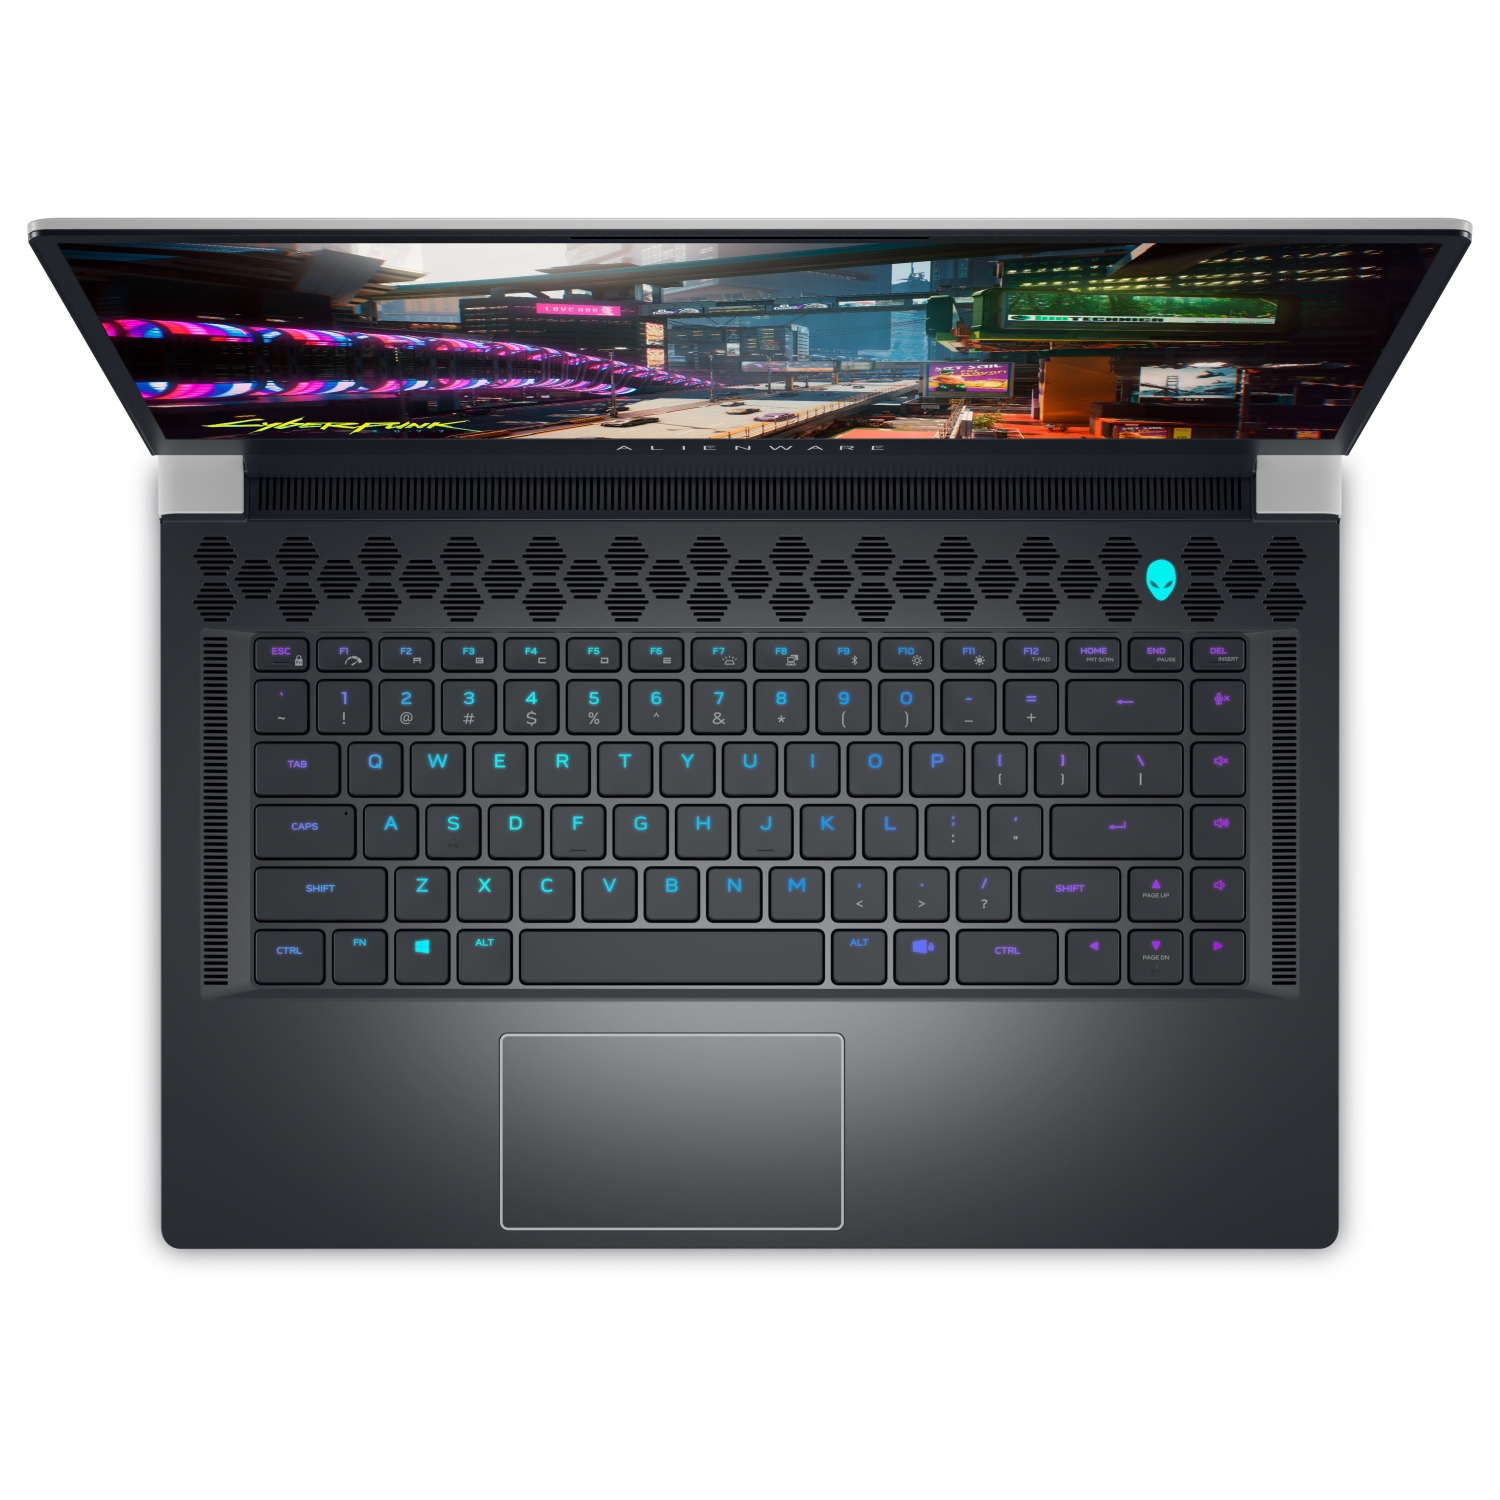 Refurbished (Excellent) – Dell Alienware X15 R2 Gaming Laptop (2022) | 15.6" FHD | Core i7 - 512GB SSD - 16GB RAM - 3070 Ti | 14 Cores @ 4.7 GHz - 12th Gen CPU - 8GB GDDR6X